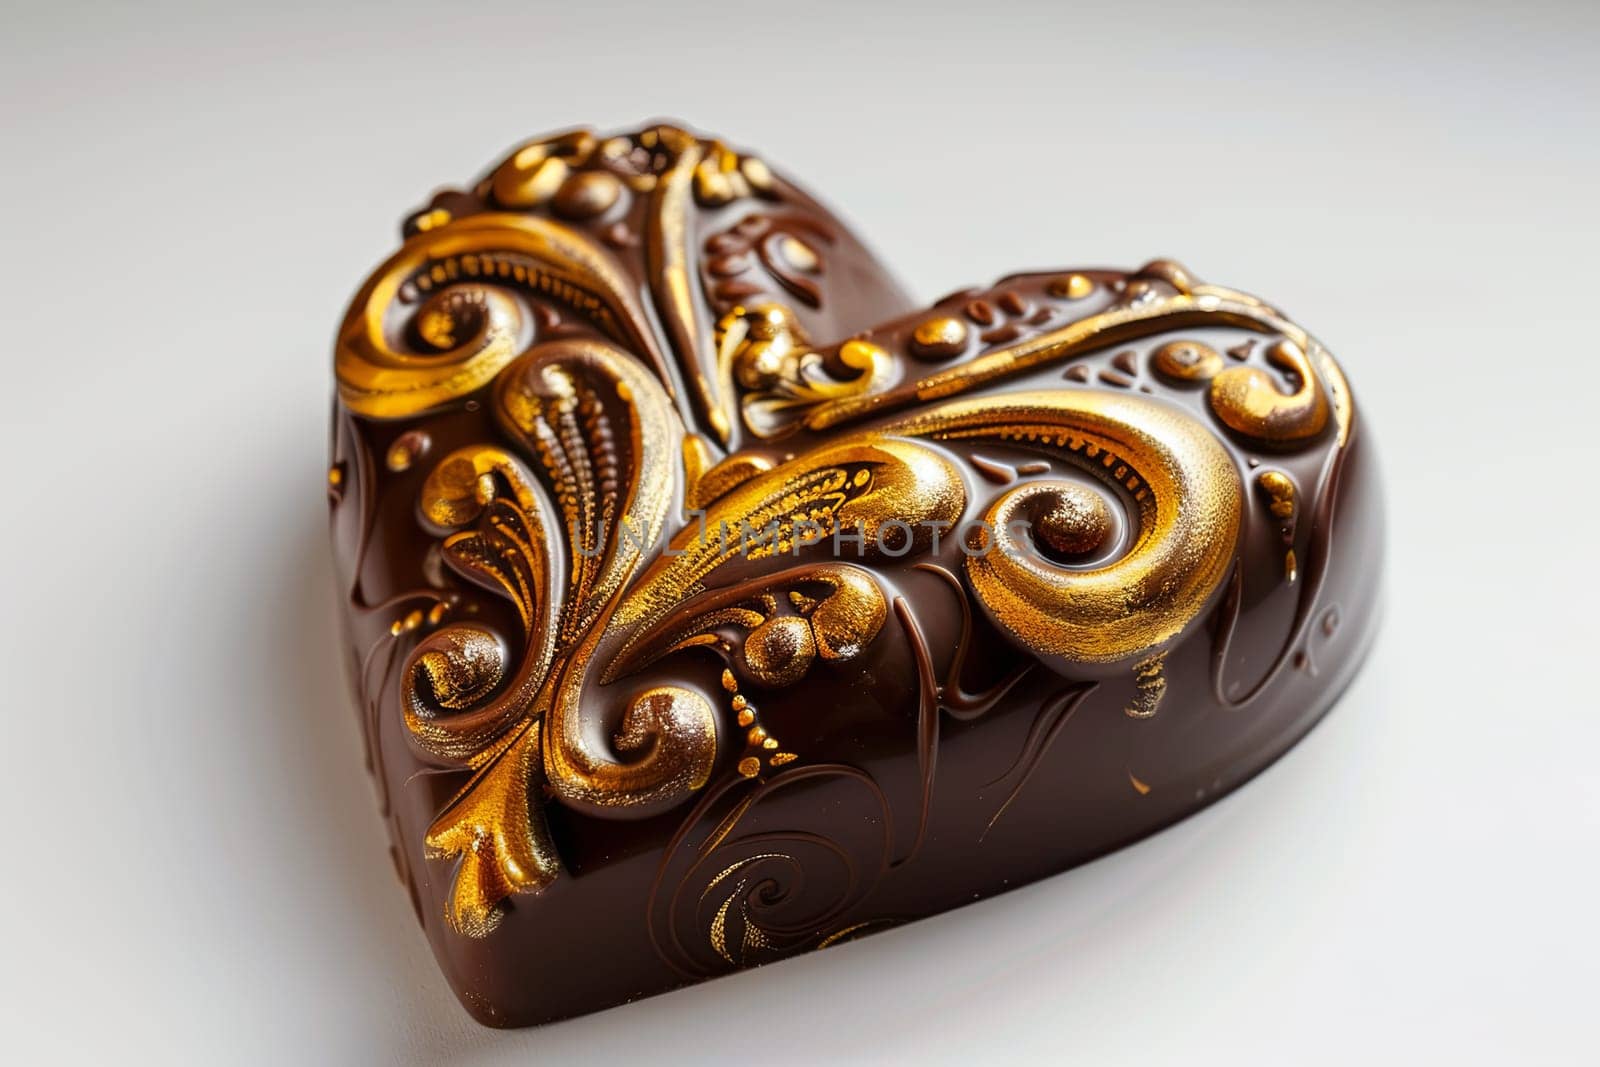 Detailed close up of an elegant heart shaped chocolate with golden accents on a white background.